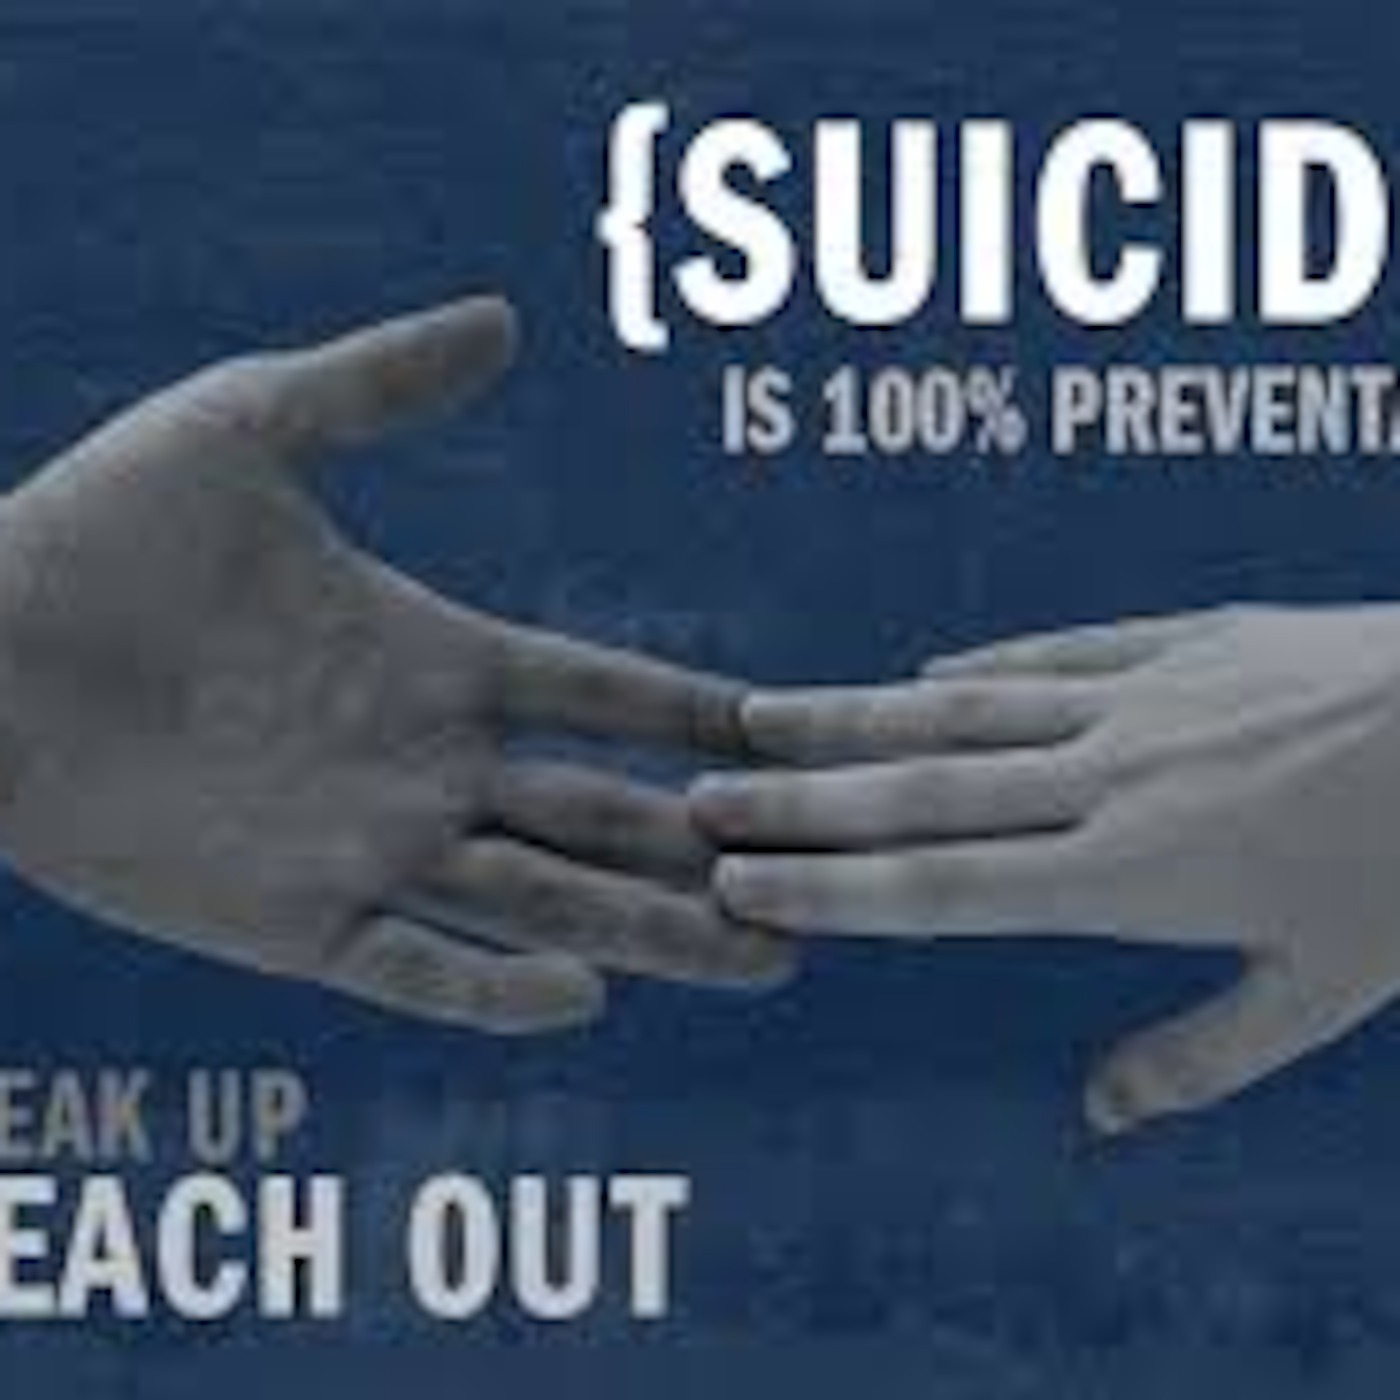 Episode 156 The pain inside, Suicide Awareness & Prevention